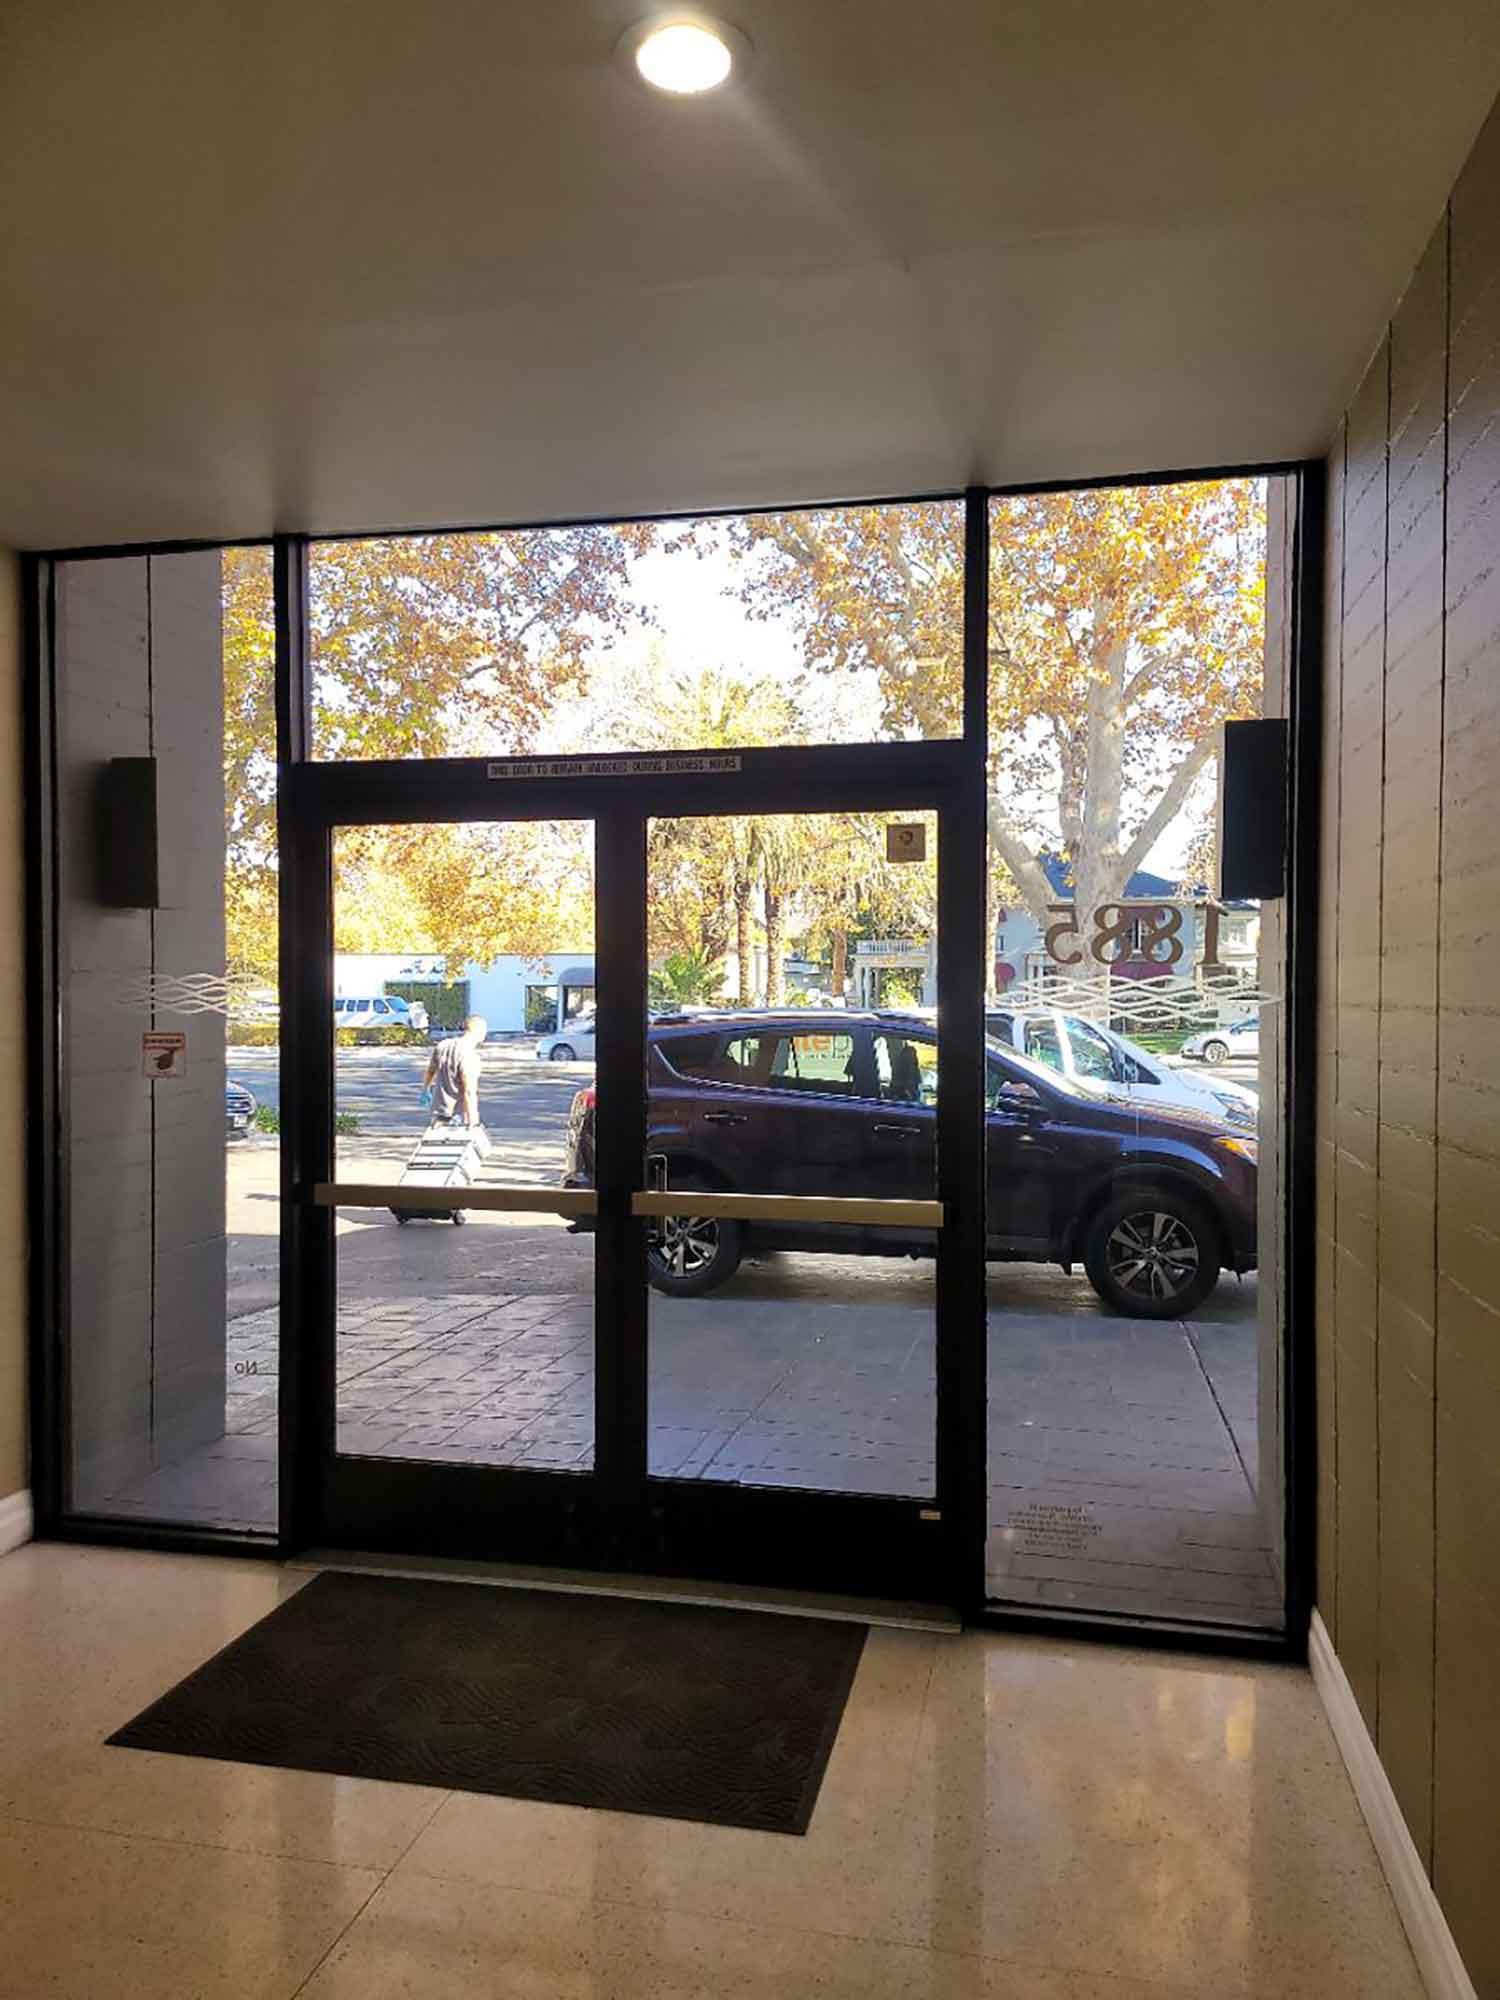 3M Safety Window Tint, installed in San Jose, CA by ClimatePro.